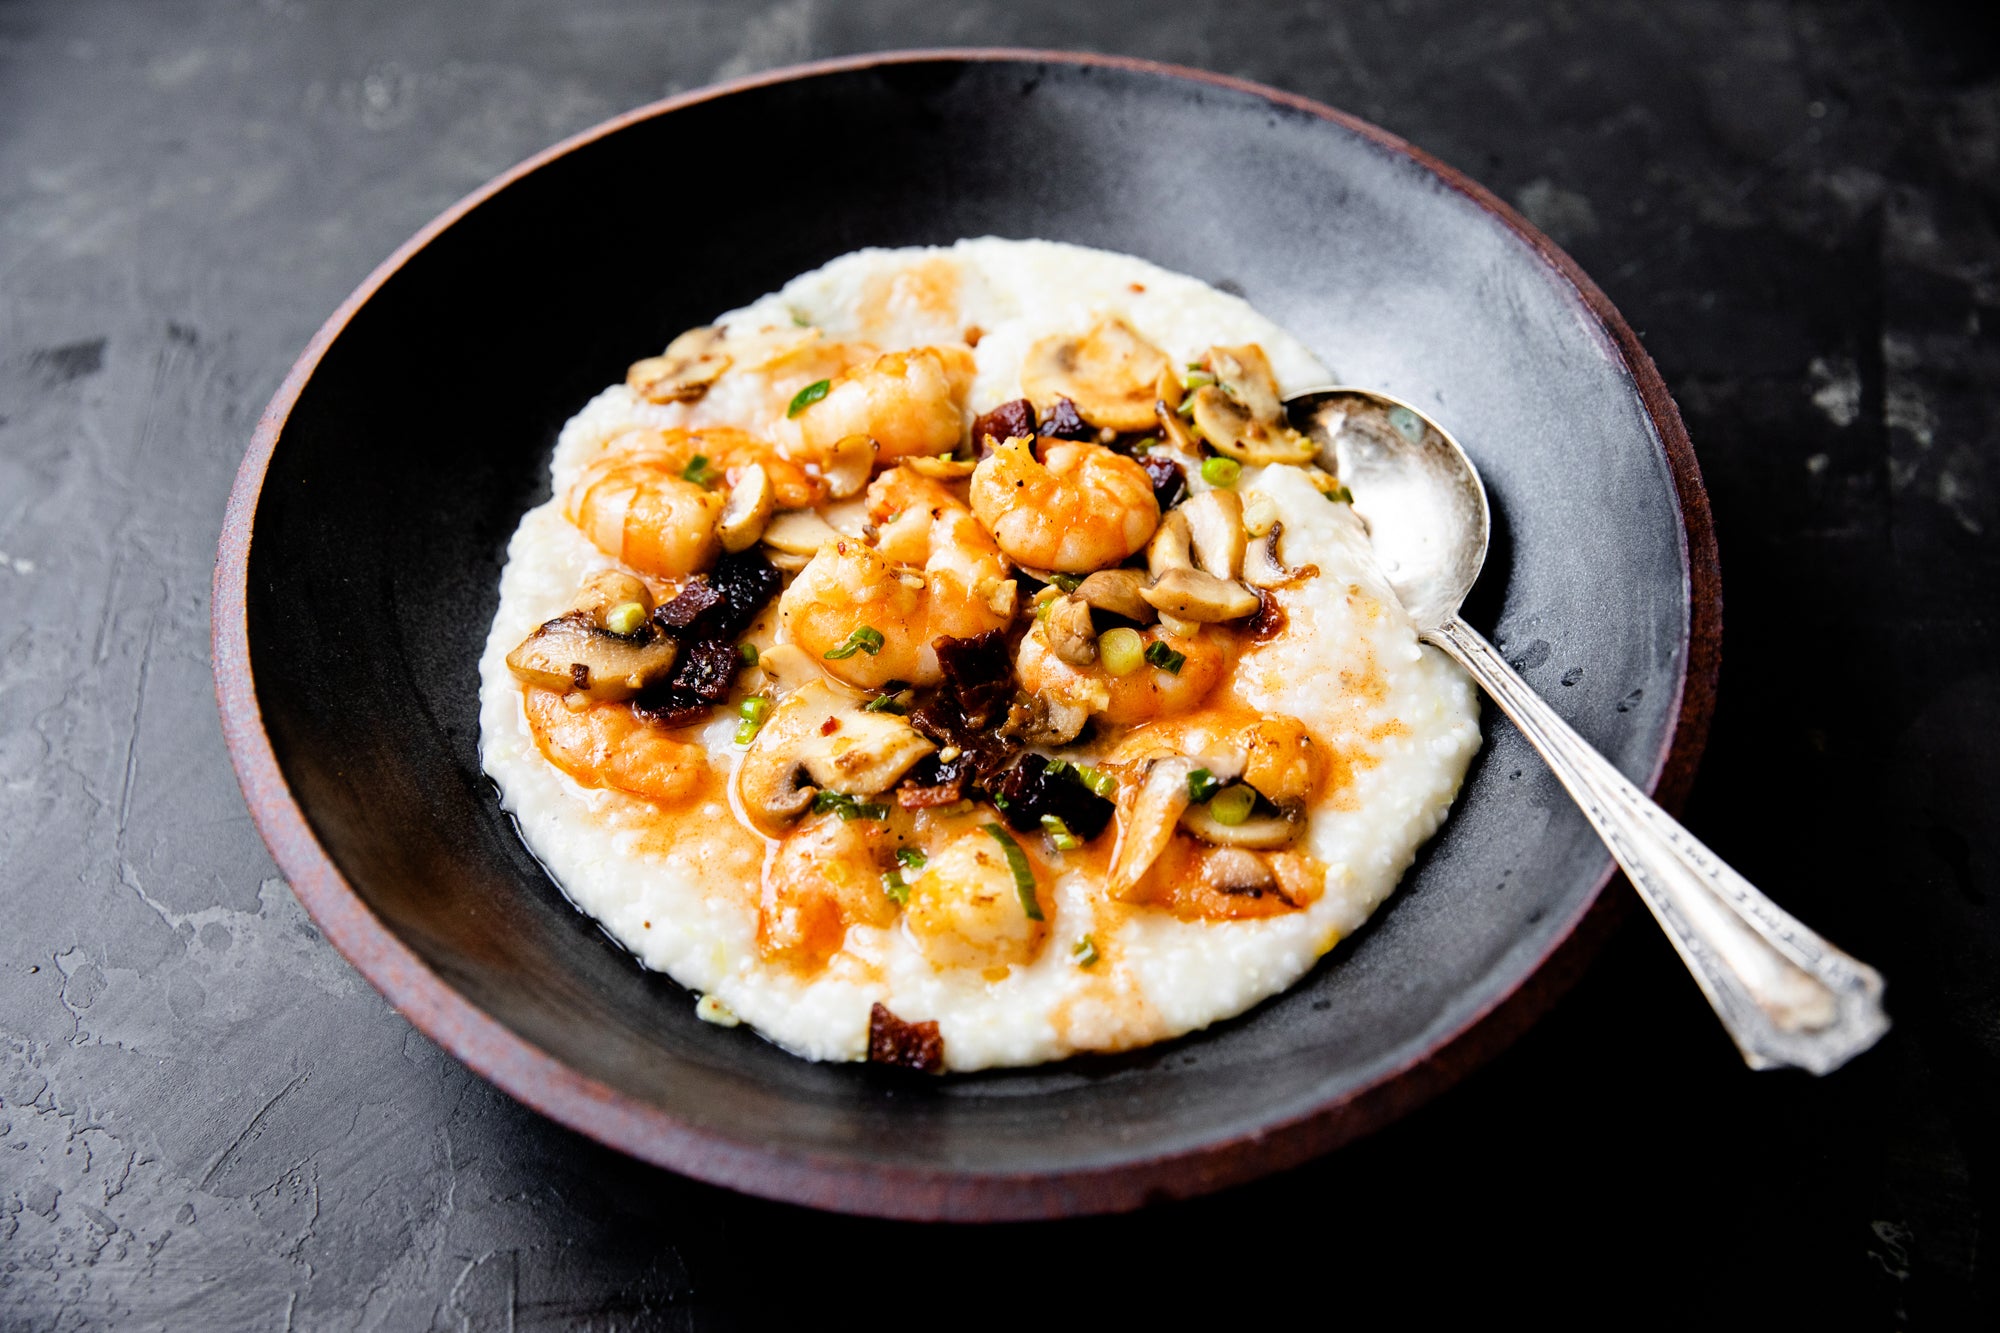 Recipe: Robert Stehling's Southern Shrimp & Grits